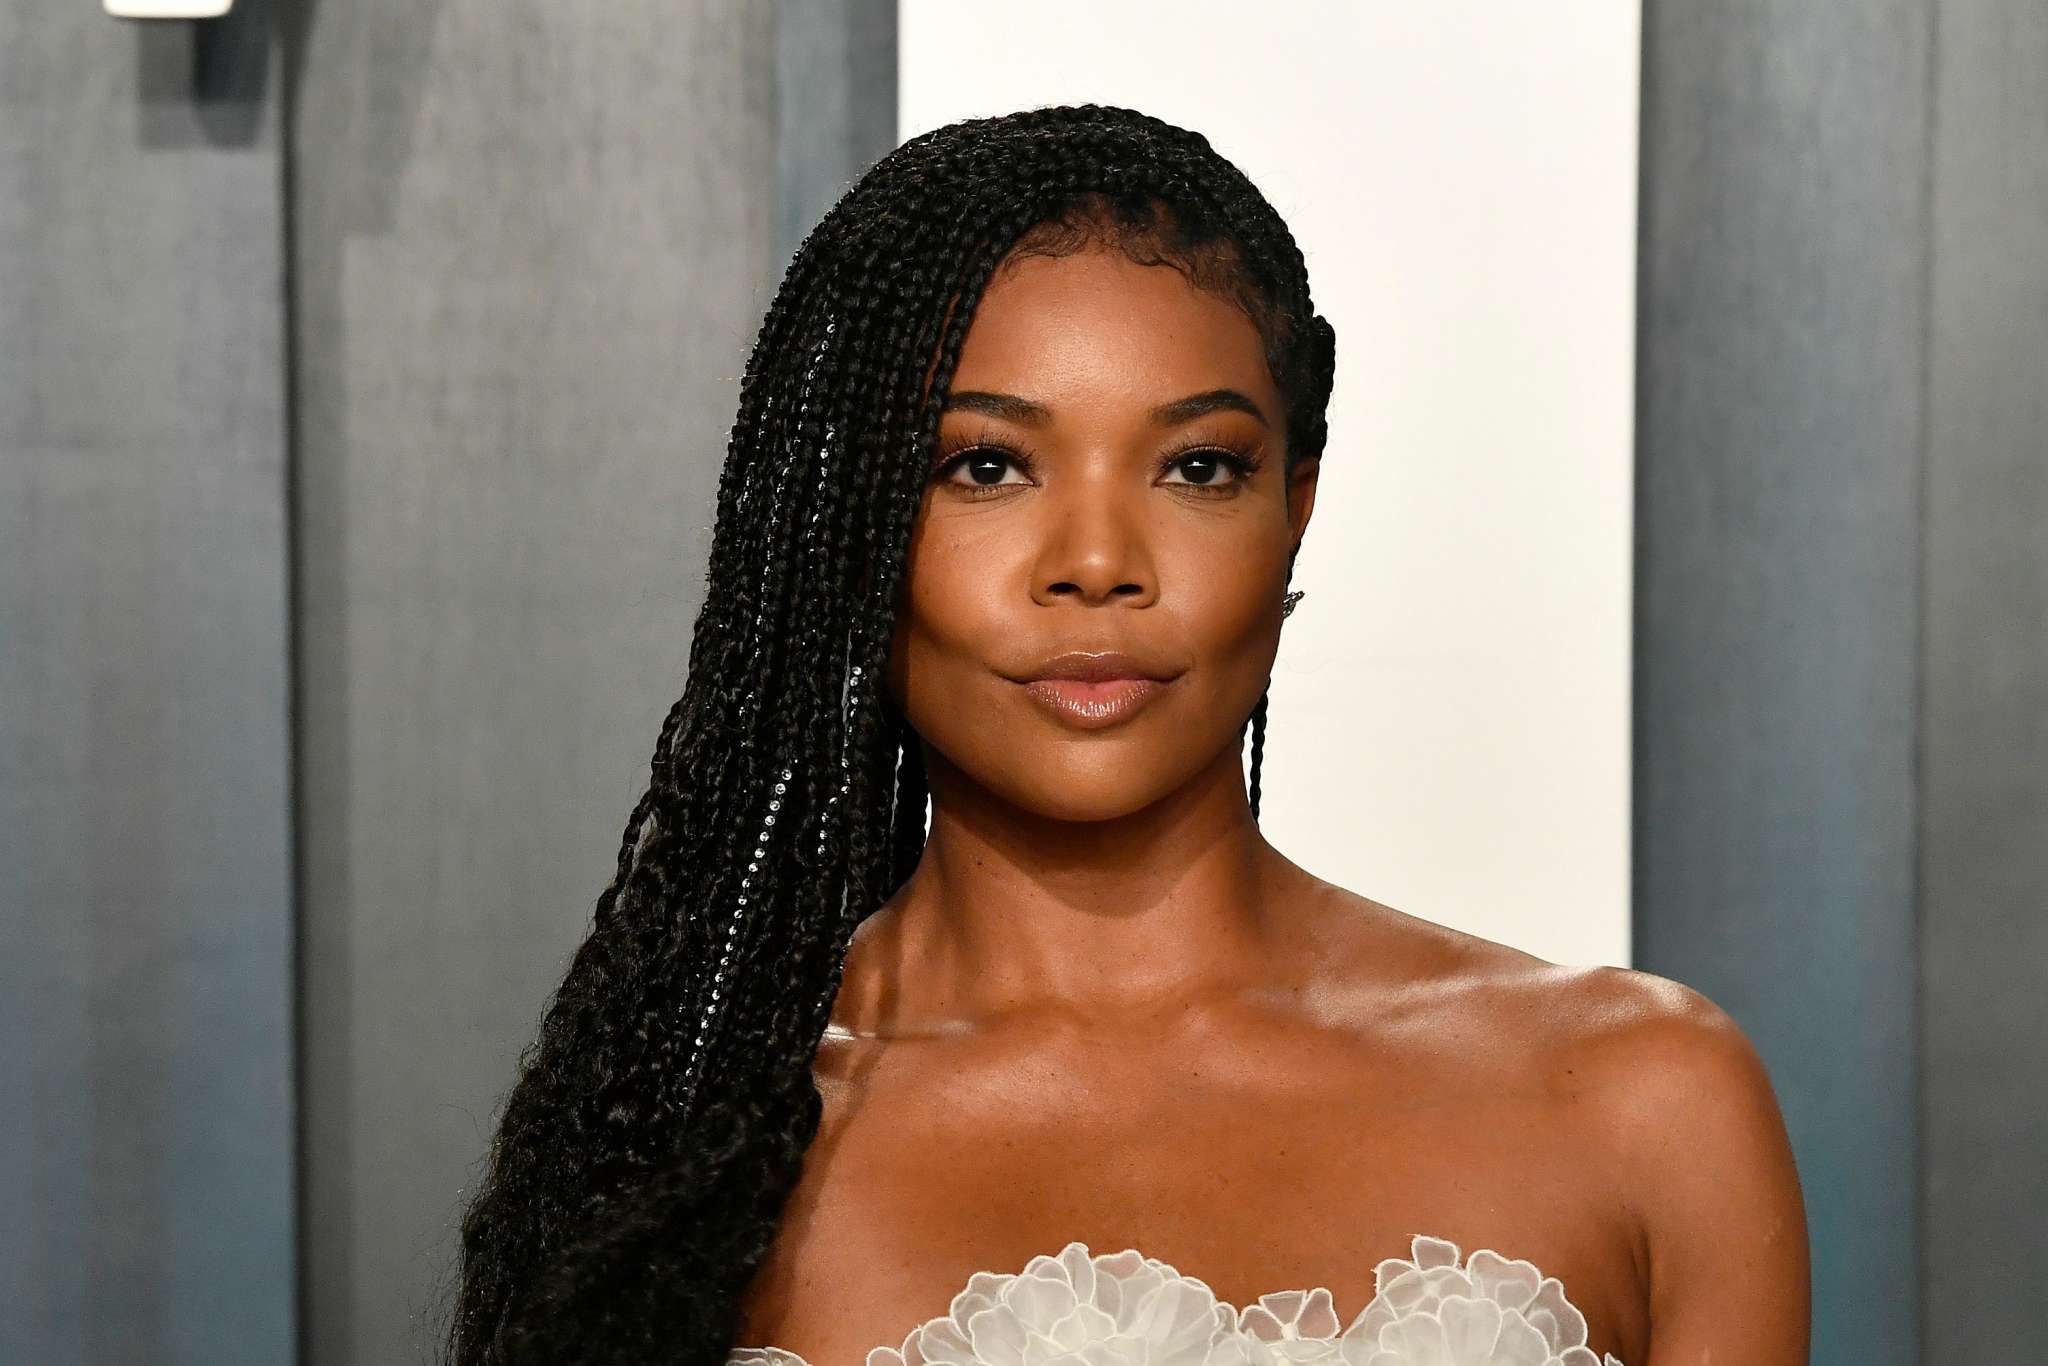 ”gabrielle-union-shows-love-to-the-iconic-sheryl-lee-ralph”